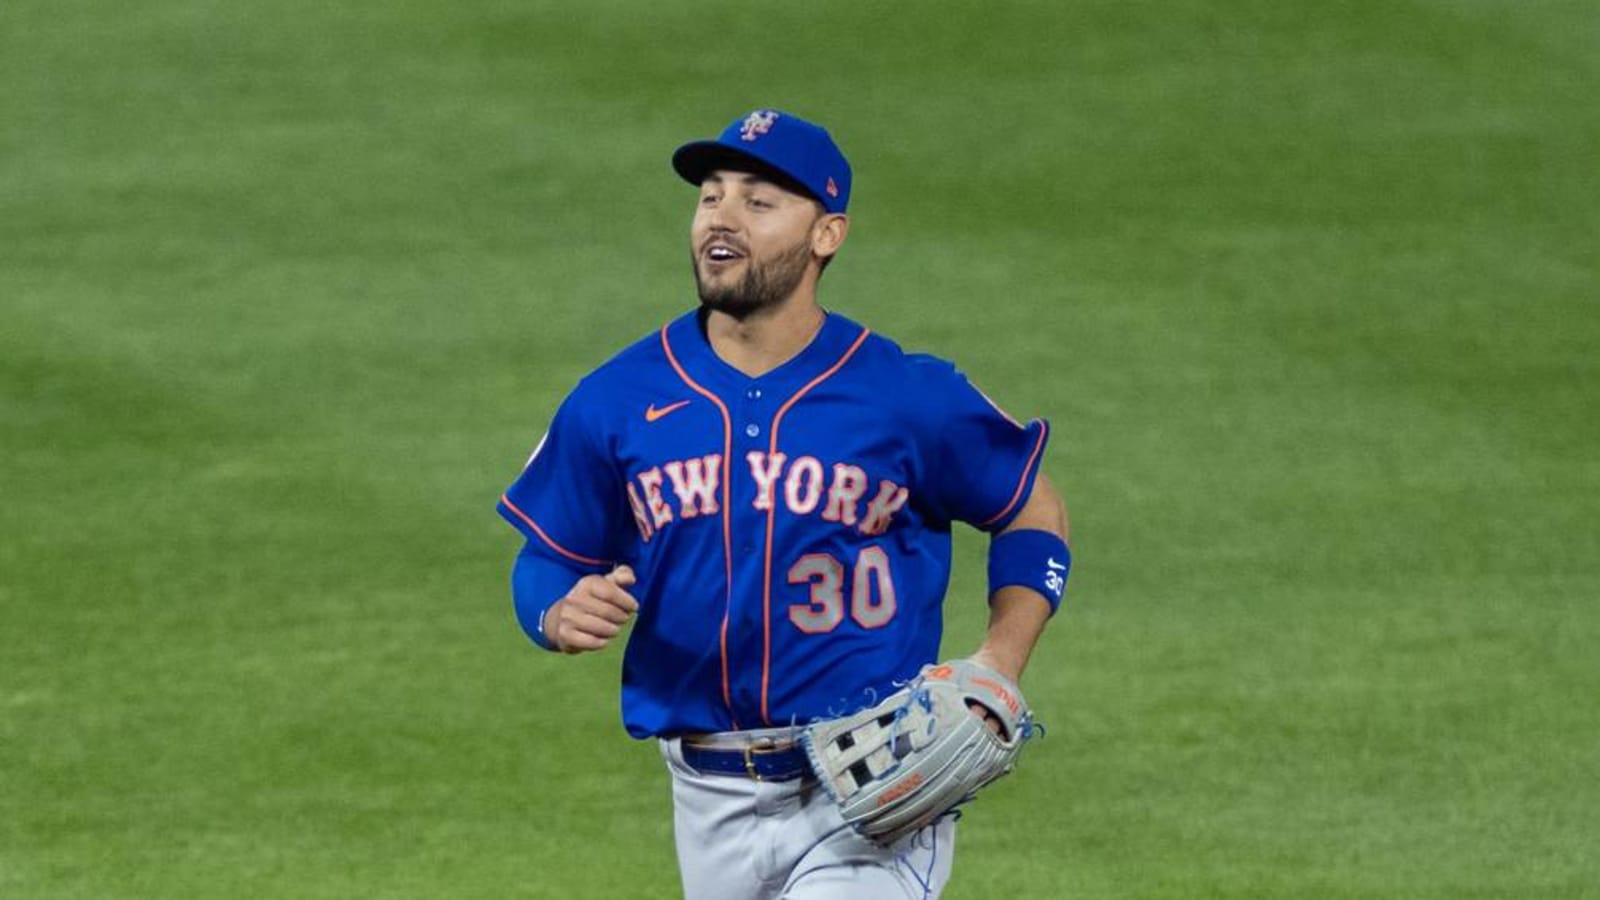 Michael Conforto, Jeff McNeil could return to Mets soon